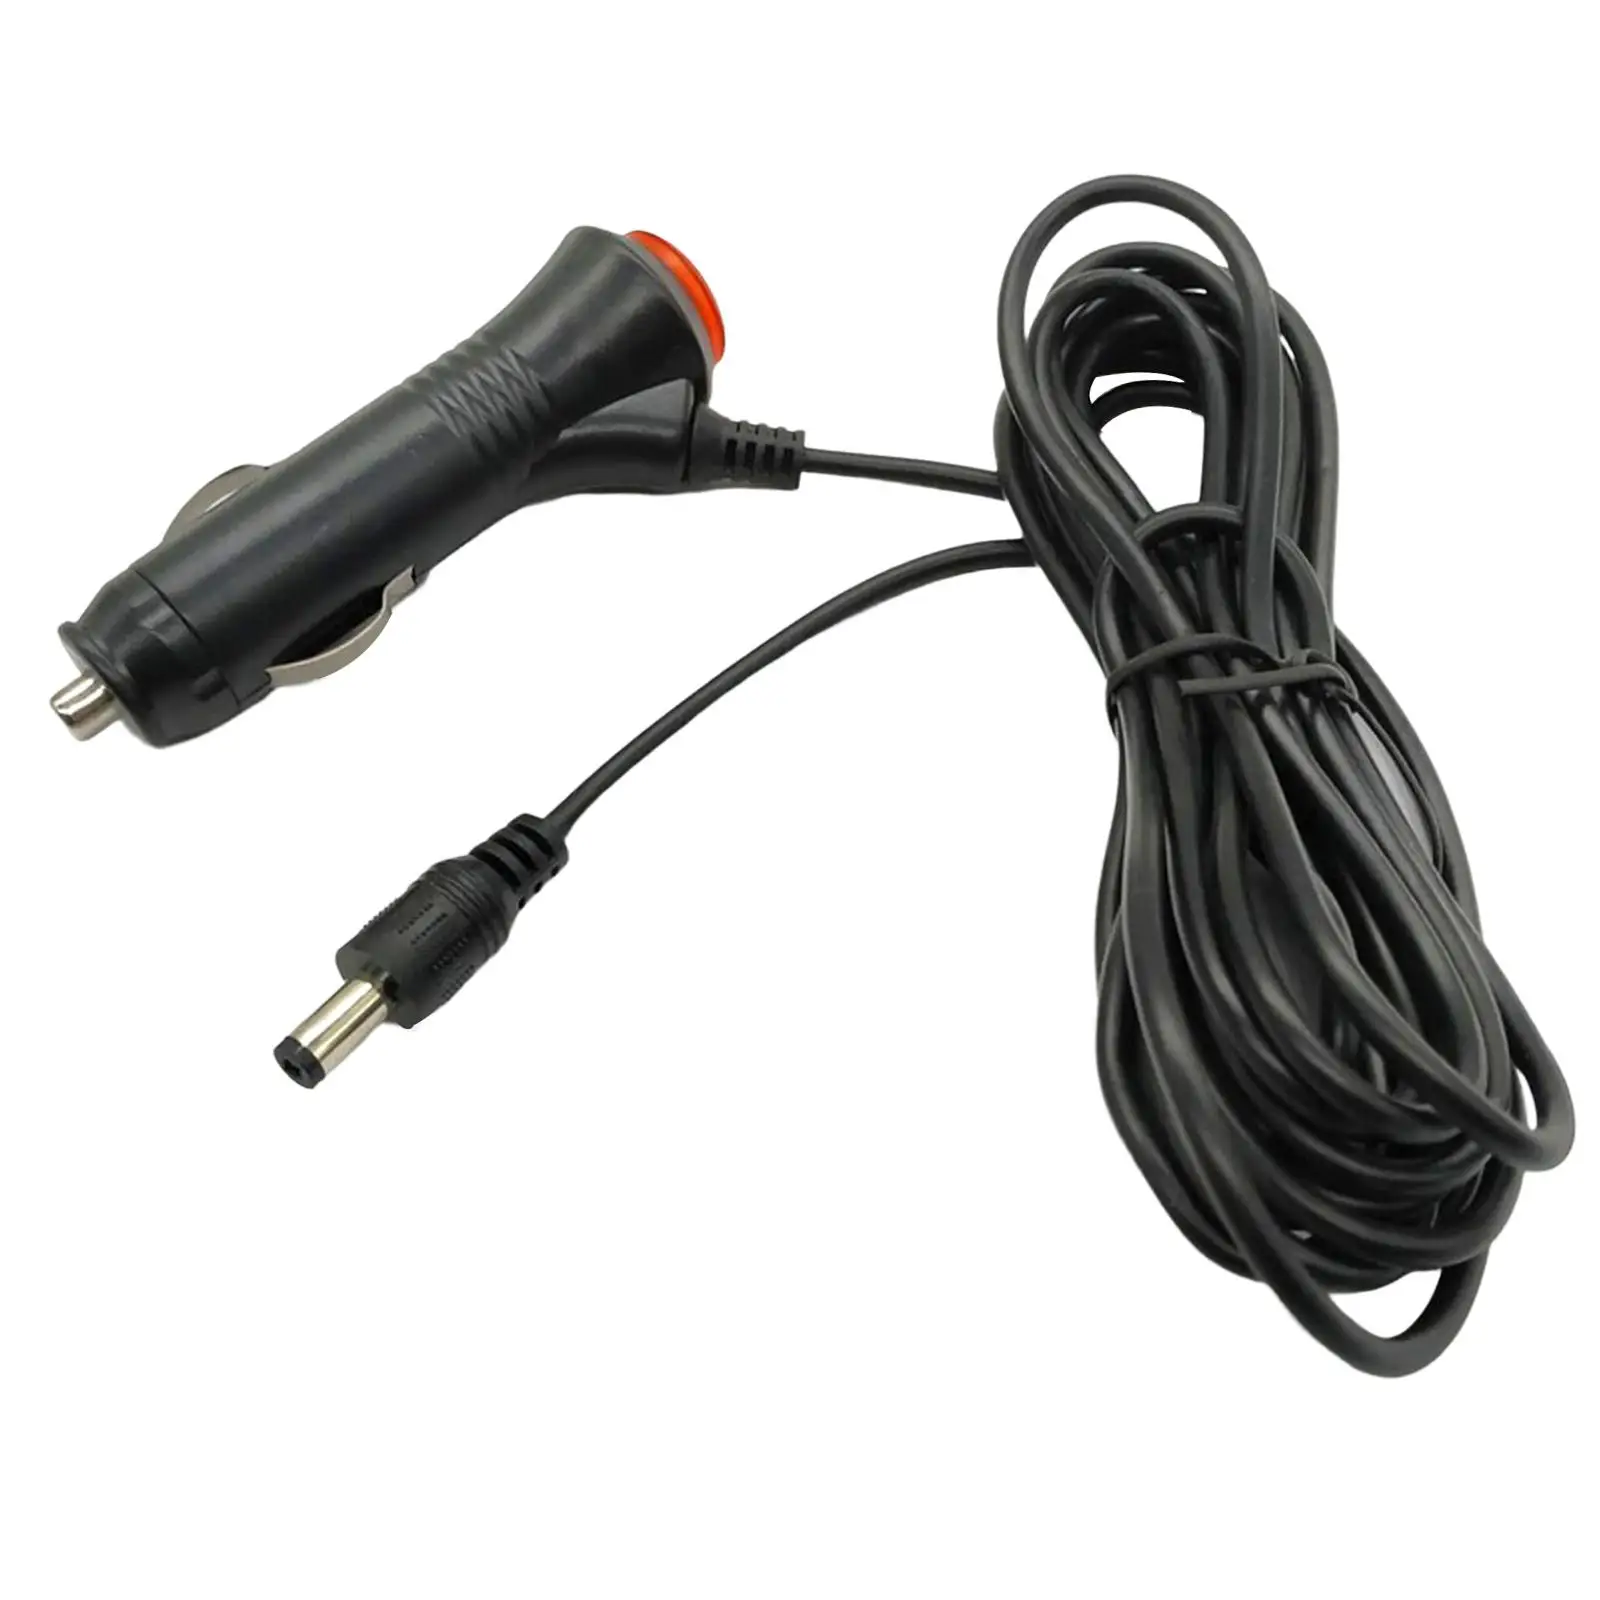 Car Cigarette Lighter Charger Cord 12V 24V 5.5Mmx2.1mm with LED Power Supply Cable for Truck DVD Player Van Bus